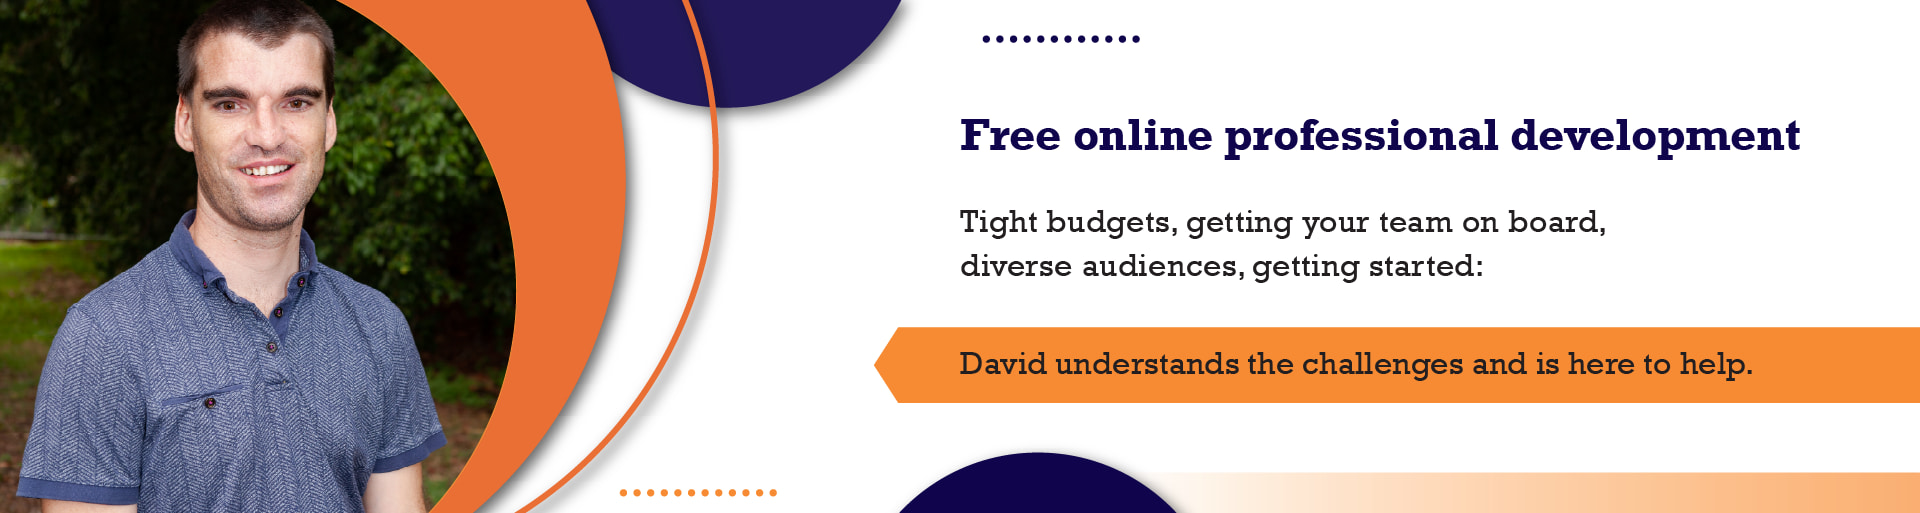 Free online professional development. Tight budgets, getting your team on board, diverse audiences, getting started: David understands the challenges and is  here to help.